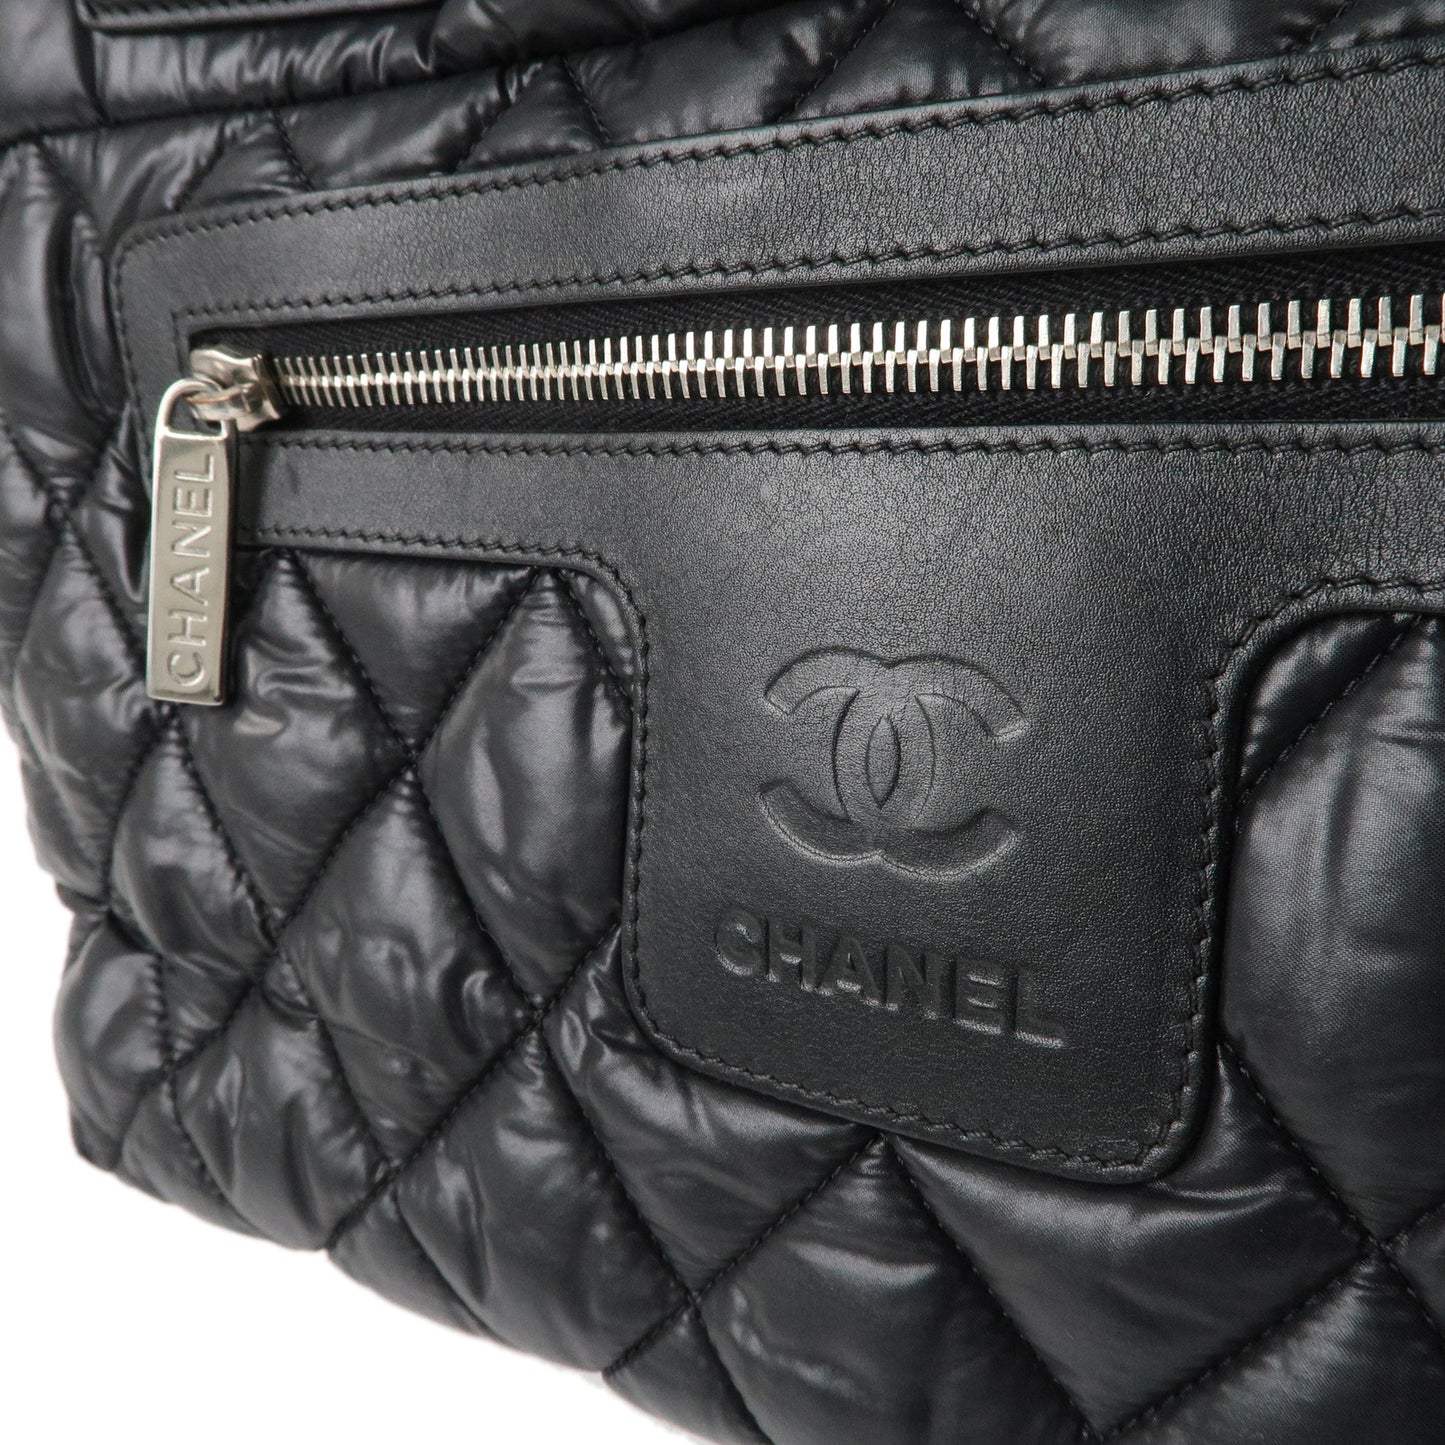 CHANEL Nylon Leather Coco Cocoon PM Tote Bag Hand Bag Black A48610